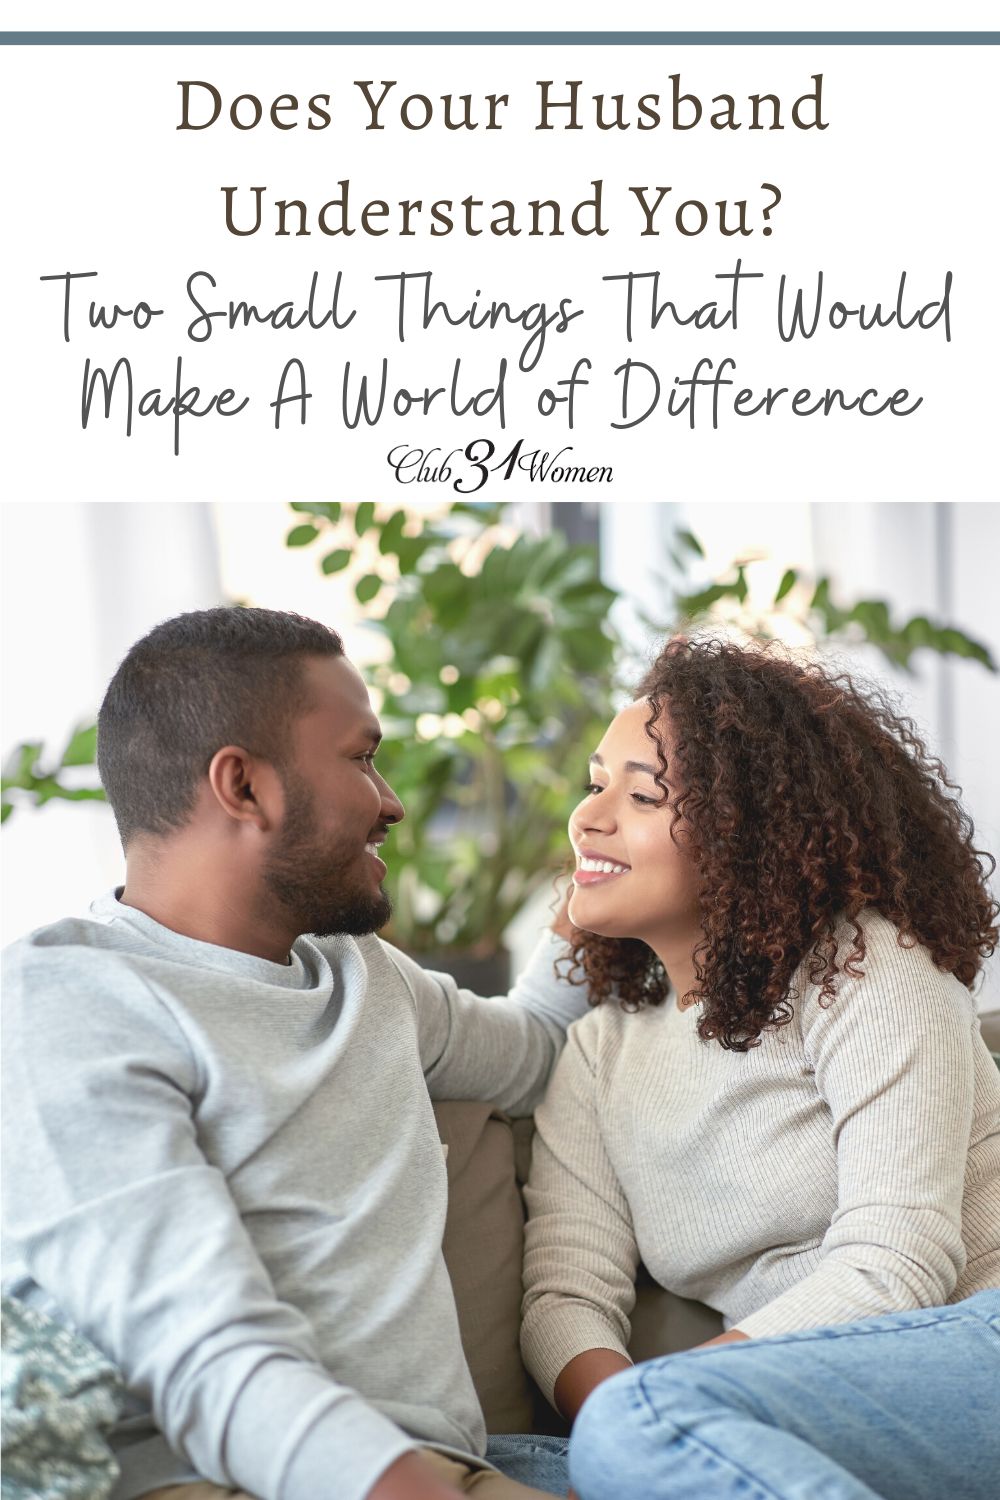 It can be a challenge for a husband to understand his wife! He wants to understand her...but just can't figure her out. Here are 2 very helpful suggestions! via @Club31Women